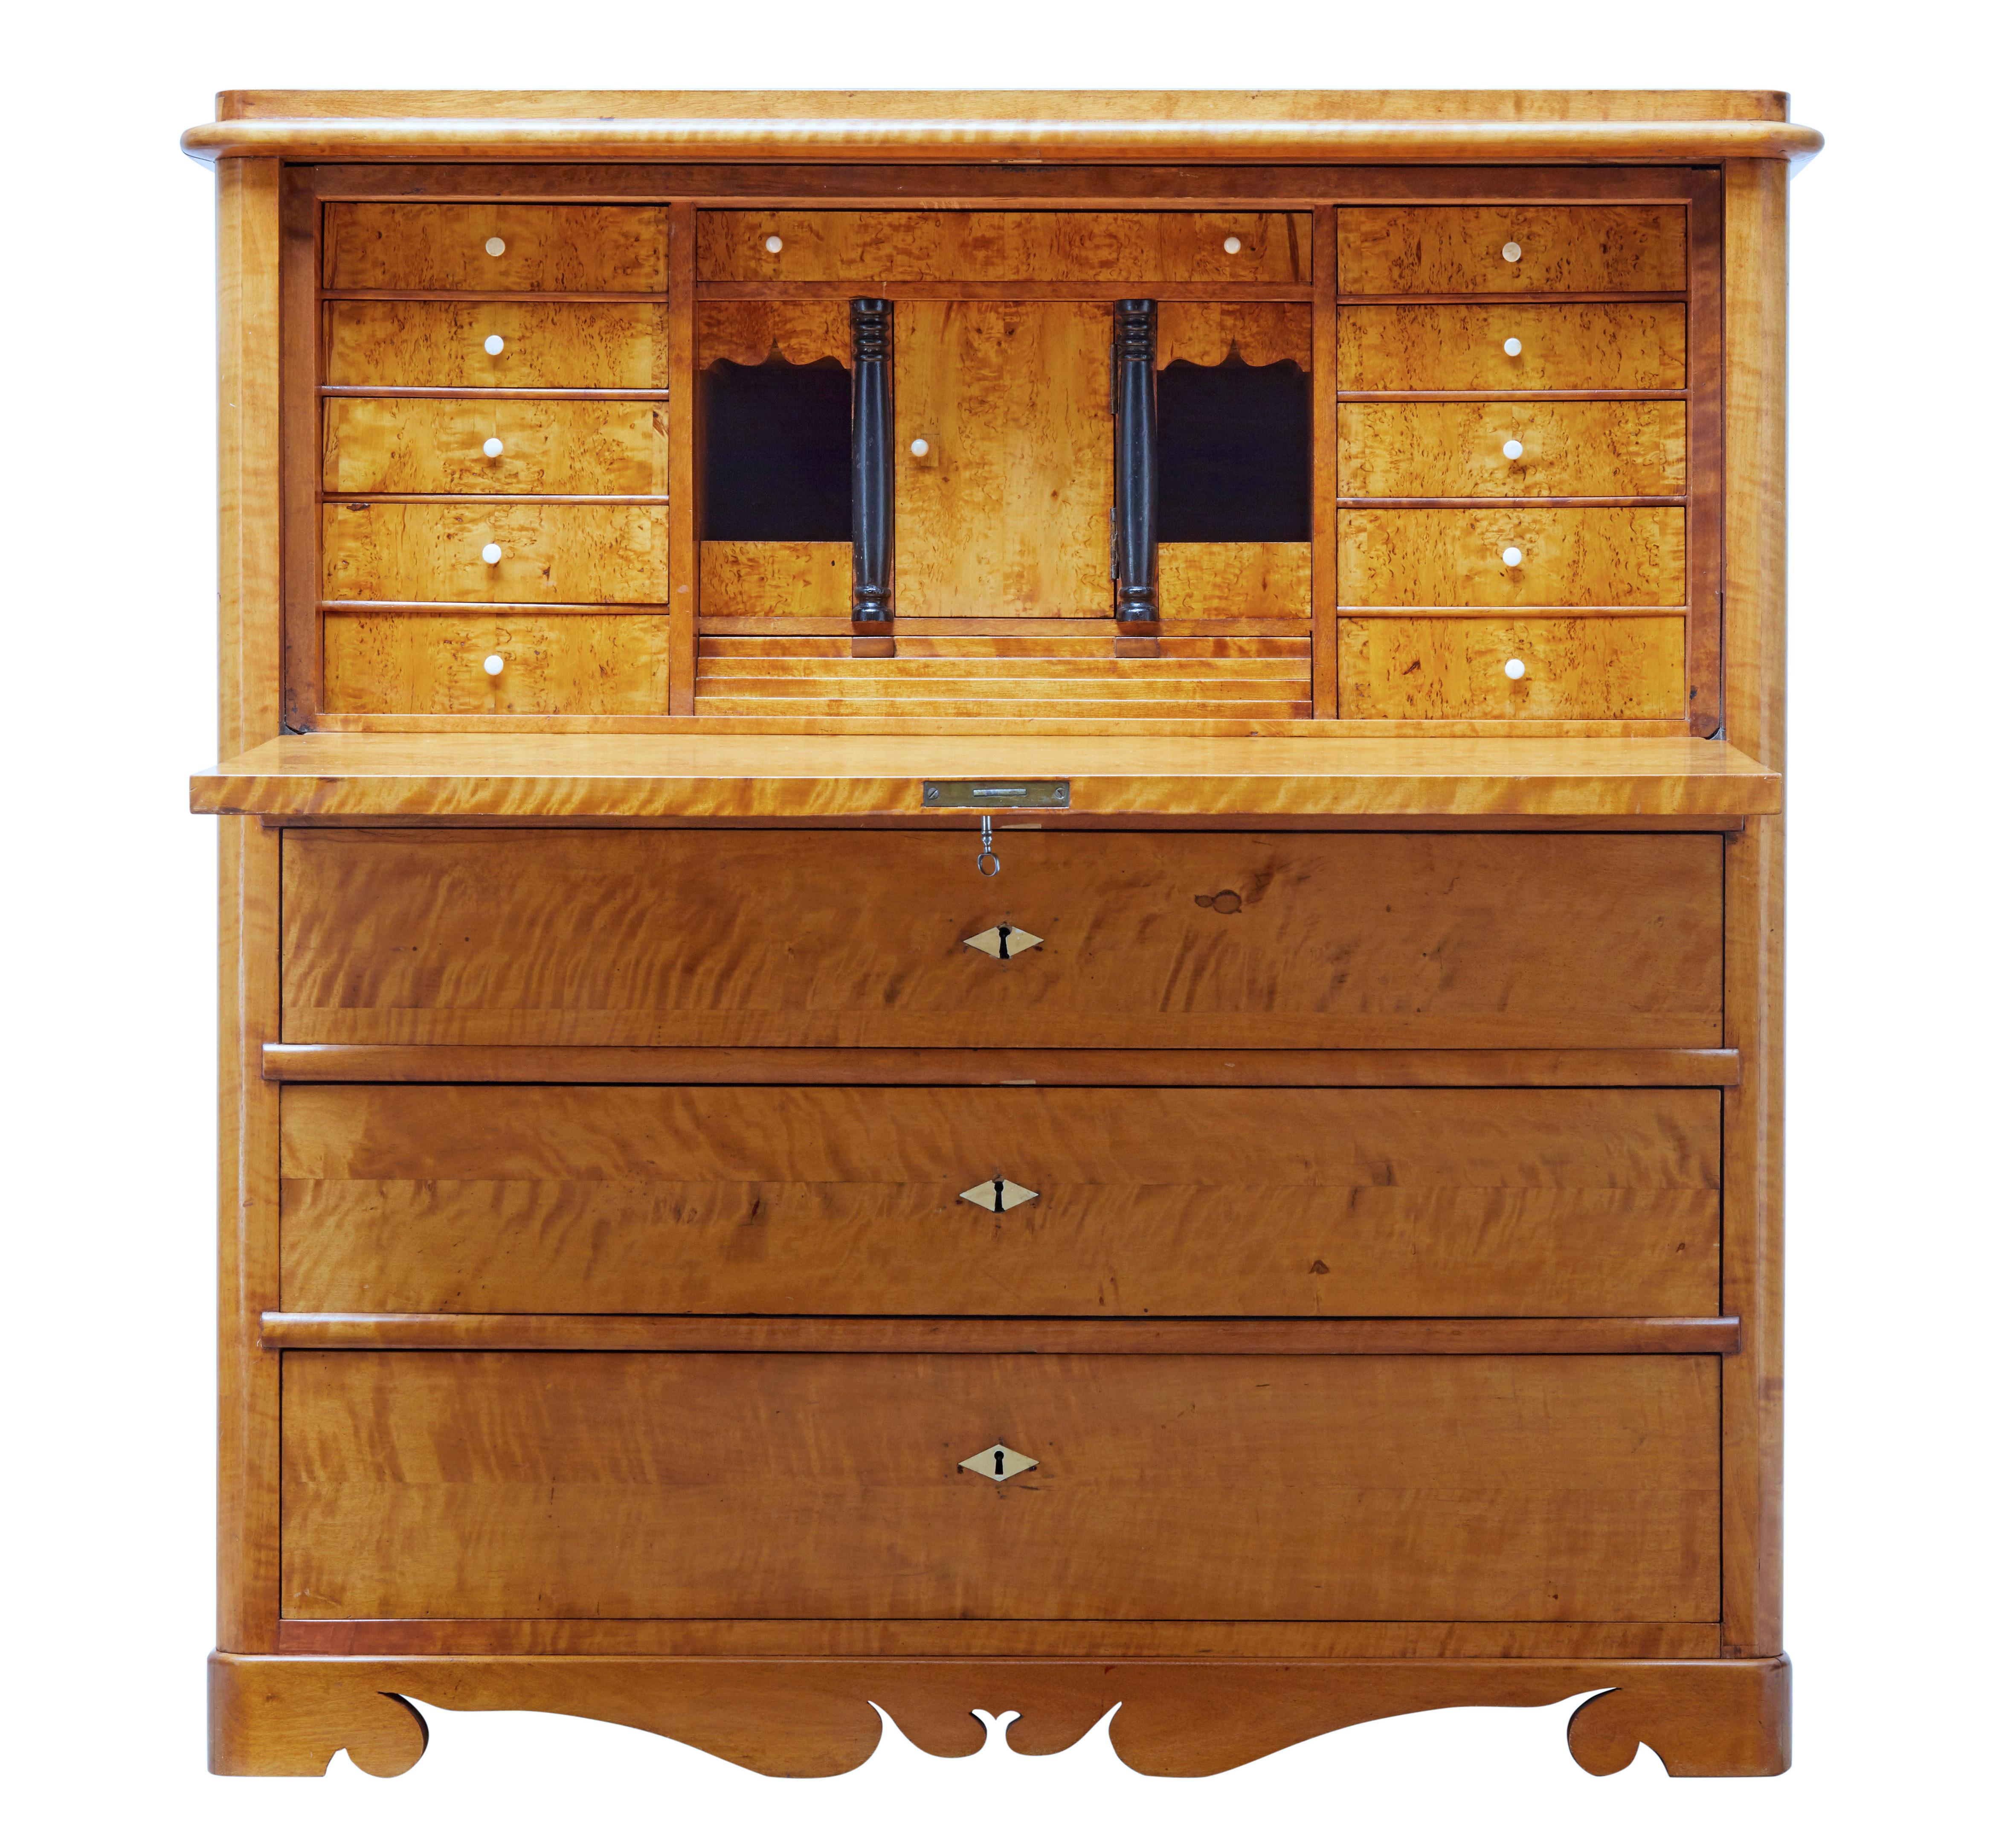 Good quality Swedish birch secretaire, circa 1870.

Fall drops down to reveal a fully fitted interior and writing surface. Interior with central tabernacle decorated with ebonized columns, drawers, pigeon holes and a step drawer below. A bank of 5